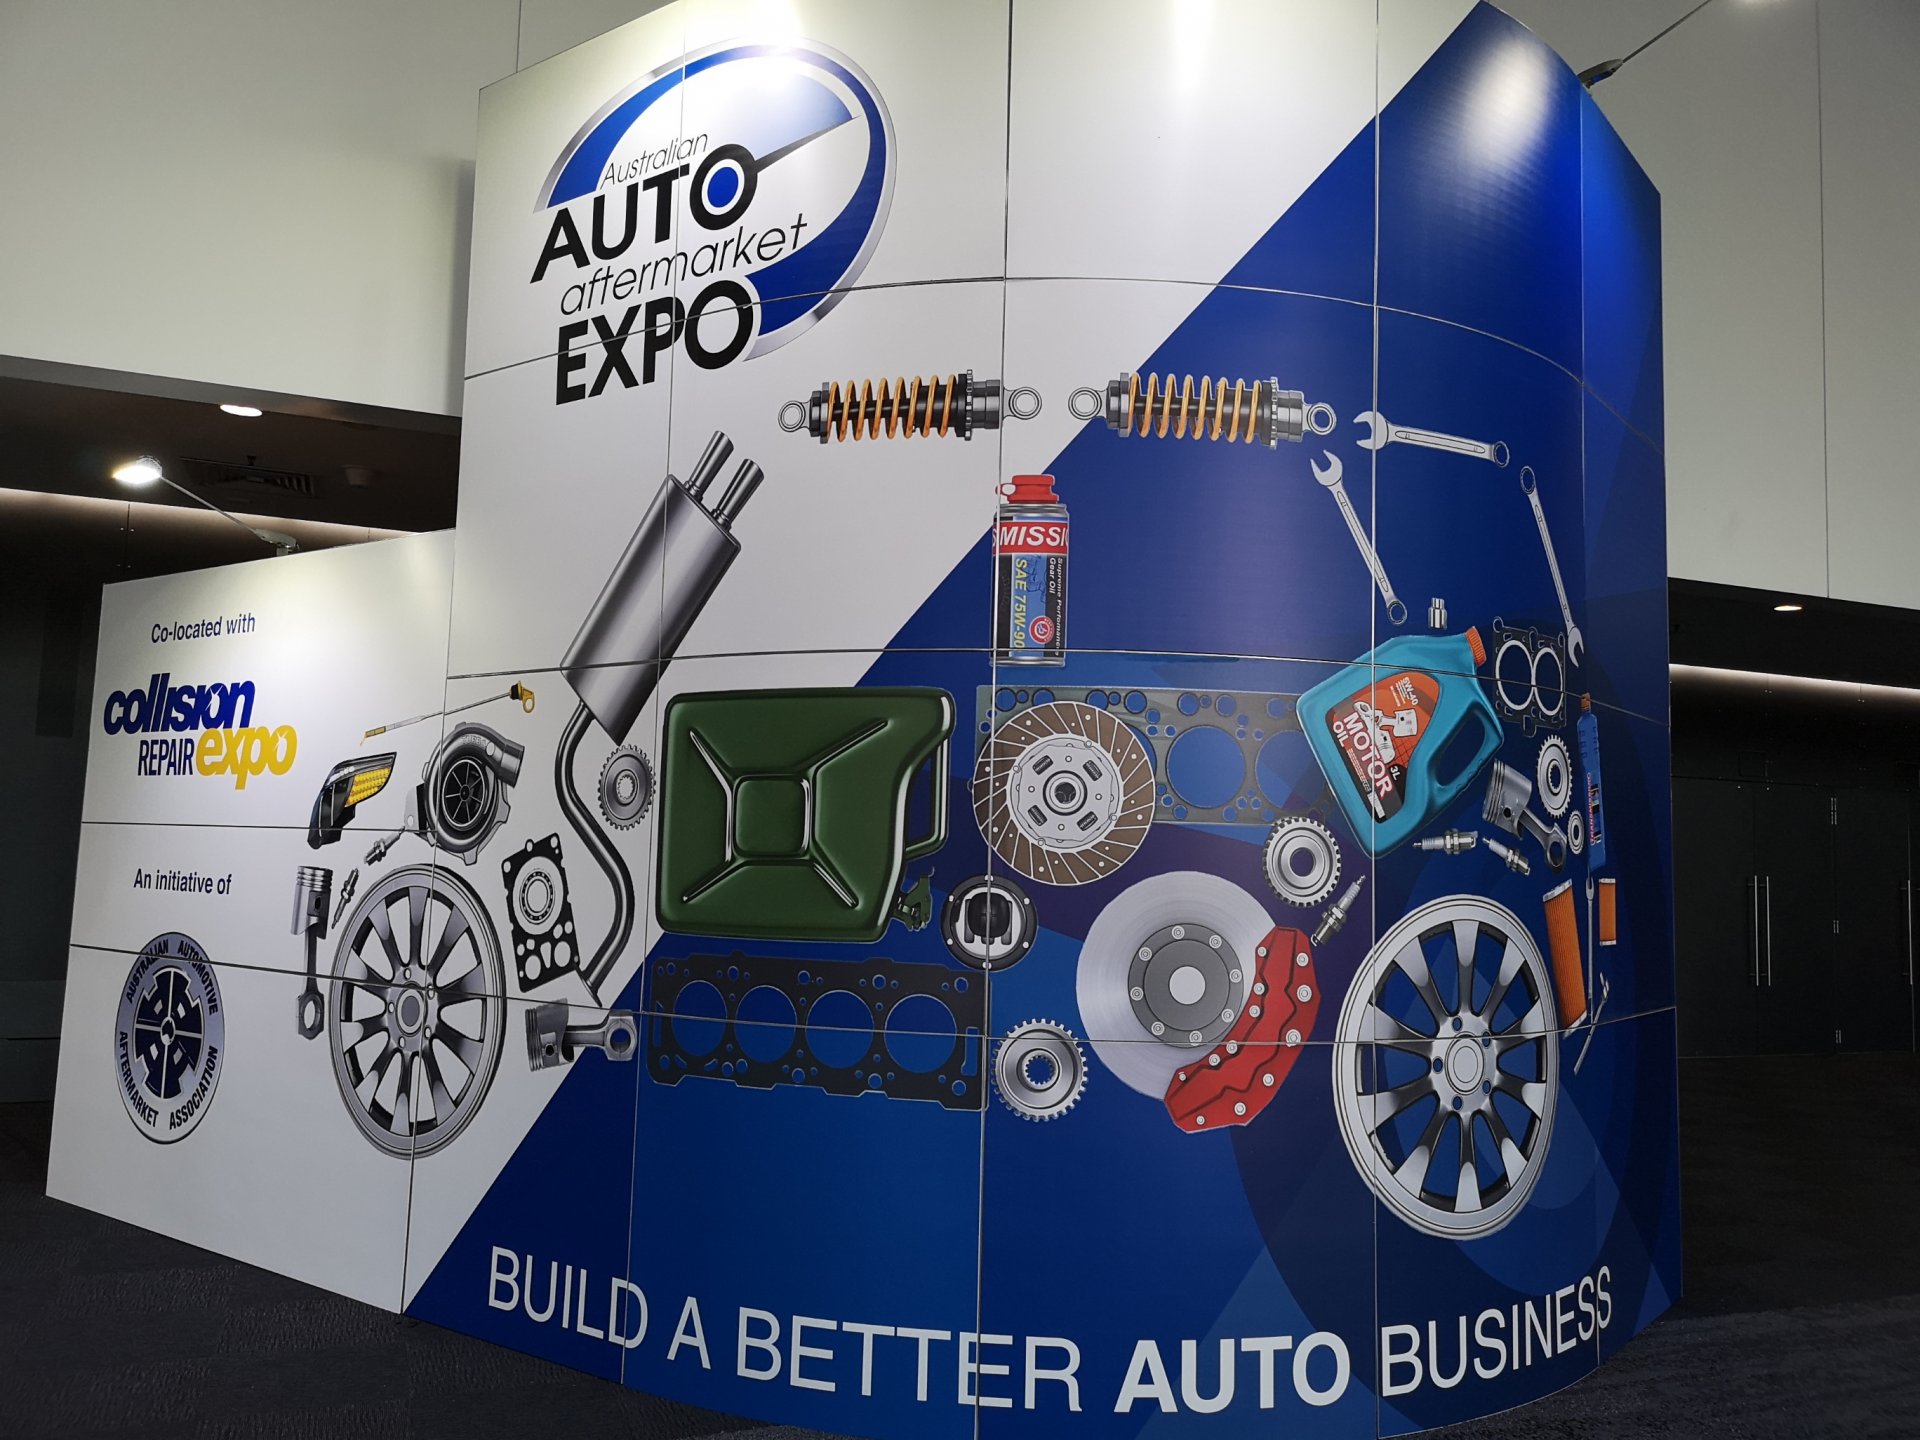 PAC in Australia Auto Aftermarket Expo 2019